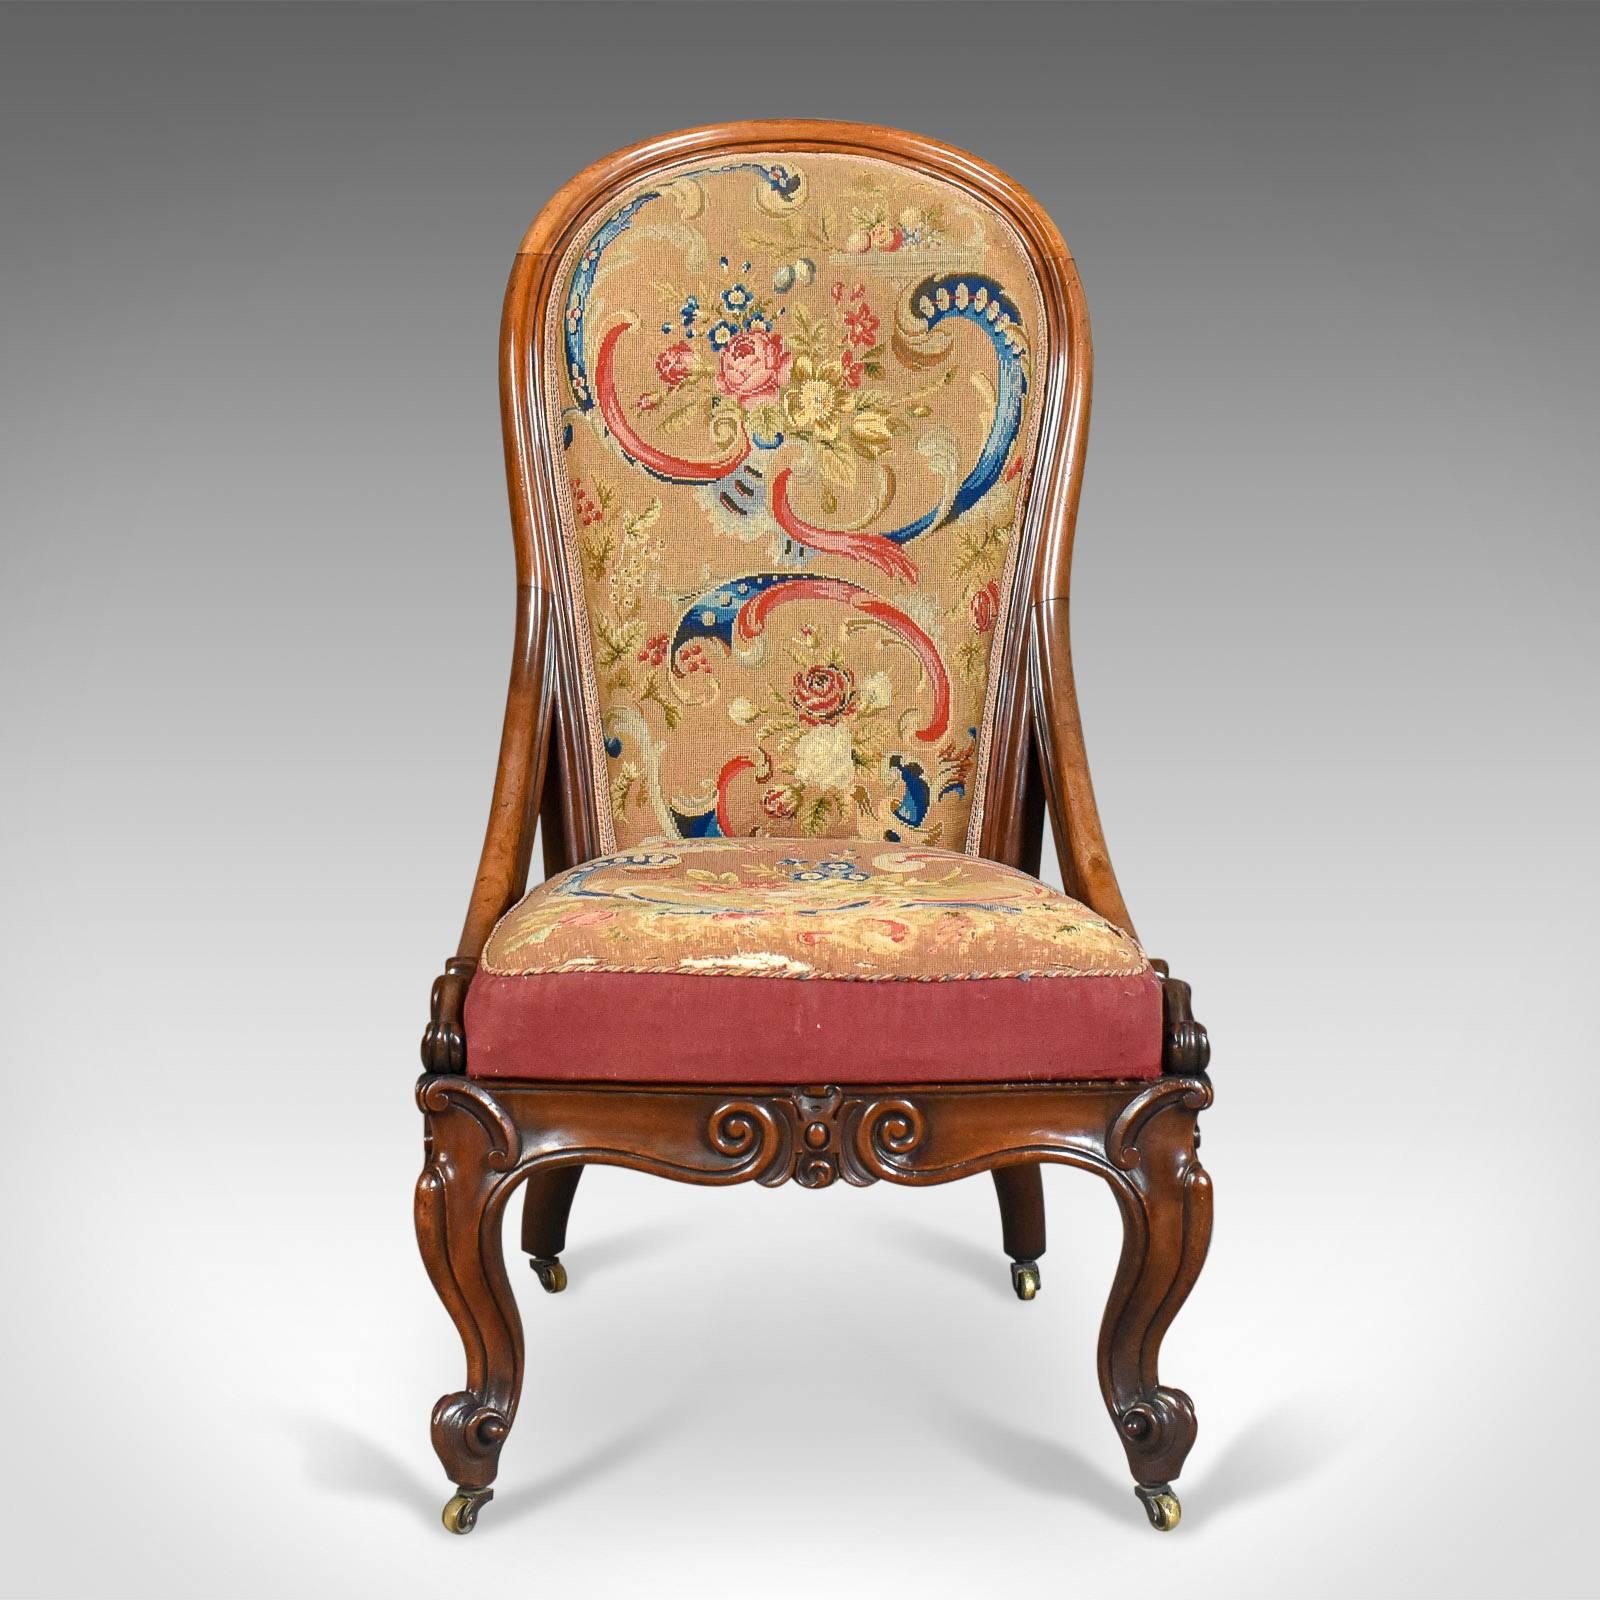 This is an antique nursing chair in English walnut and needlepoint tapestry dating to the early Victorian period, circa 1840.

Superior quality and solid walnut frame displaying good color
Well proportioned with desirable aged